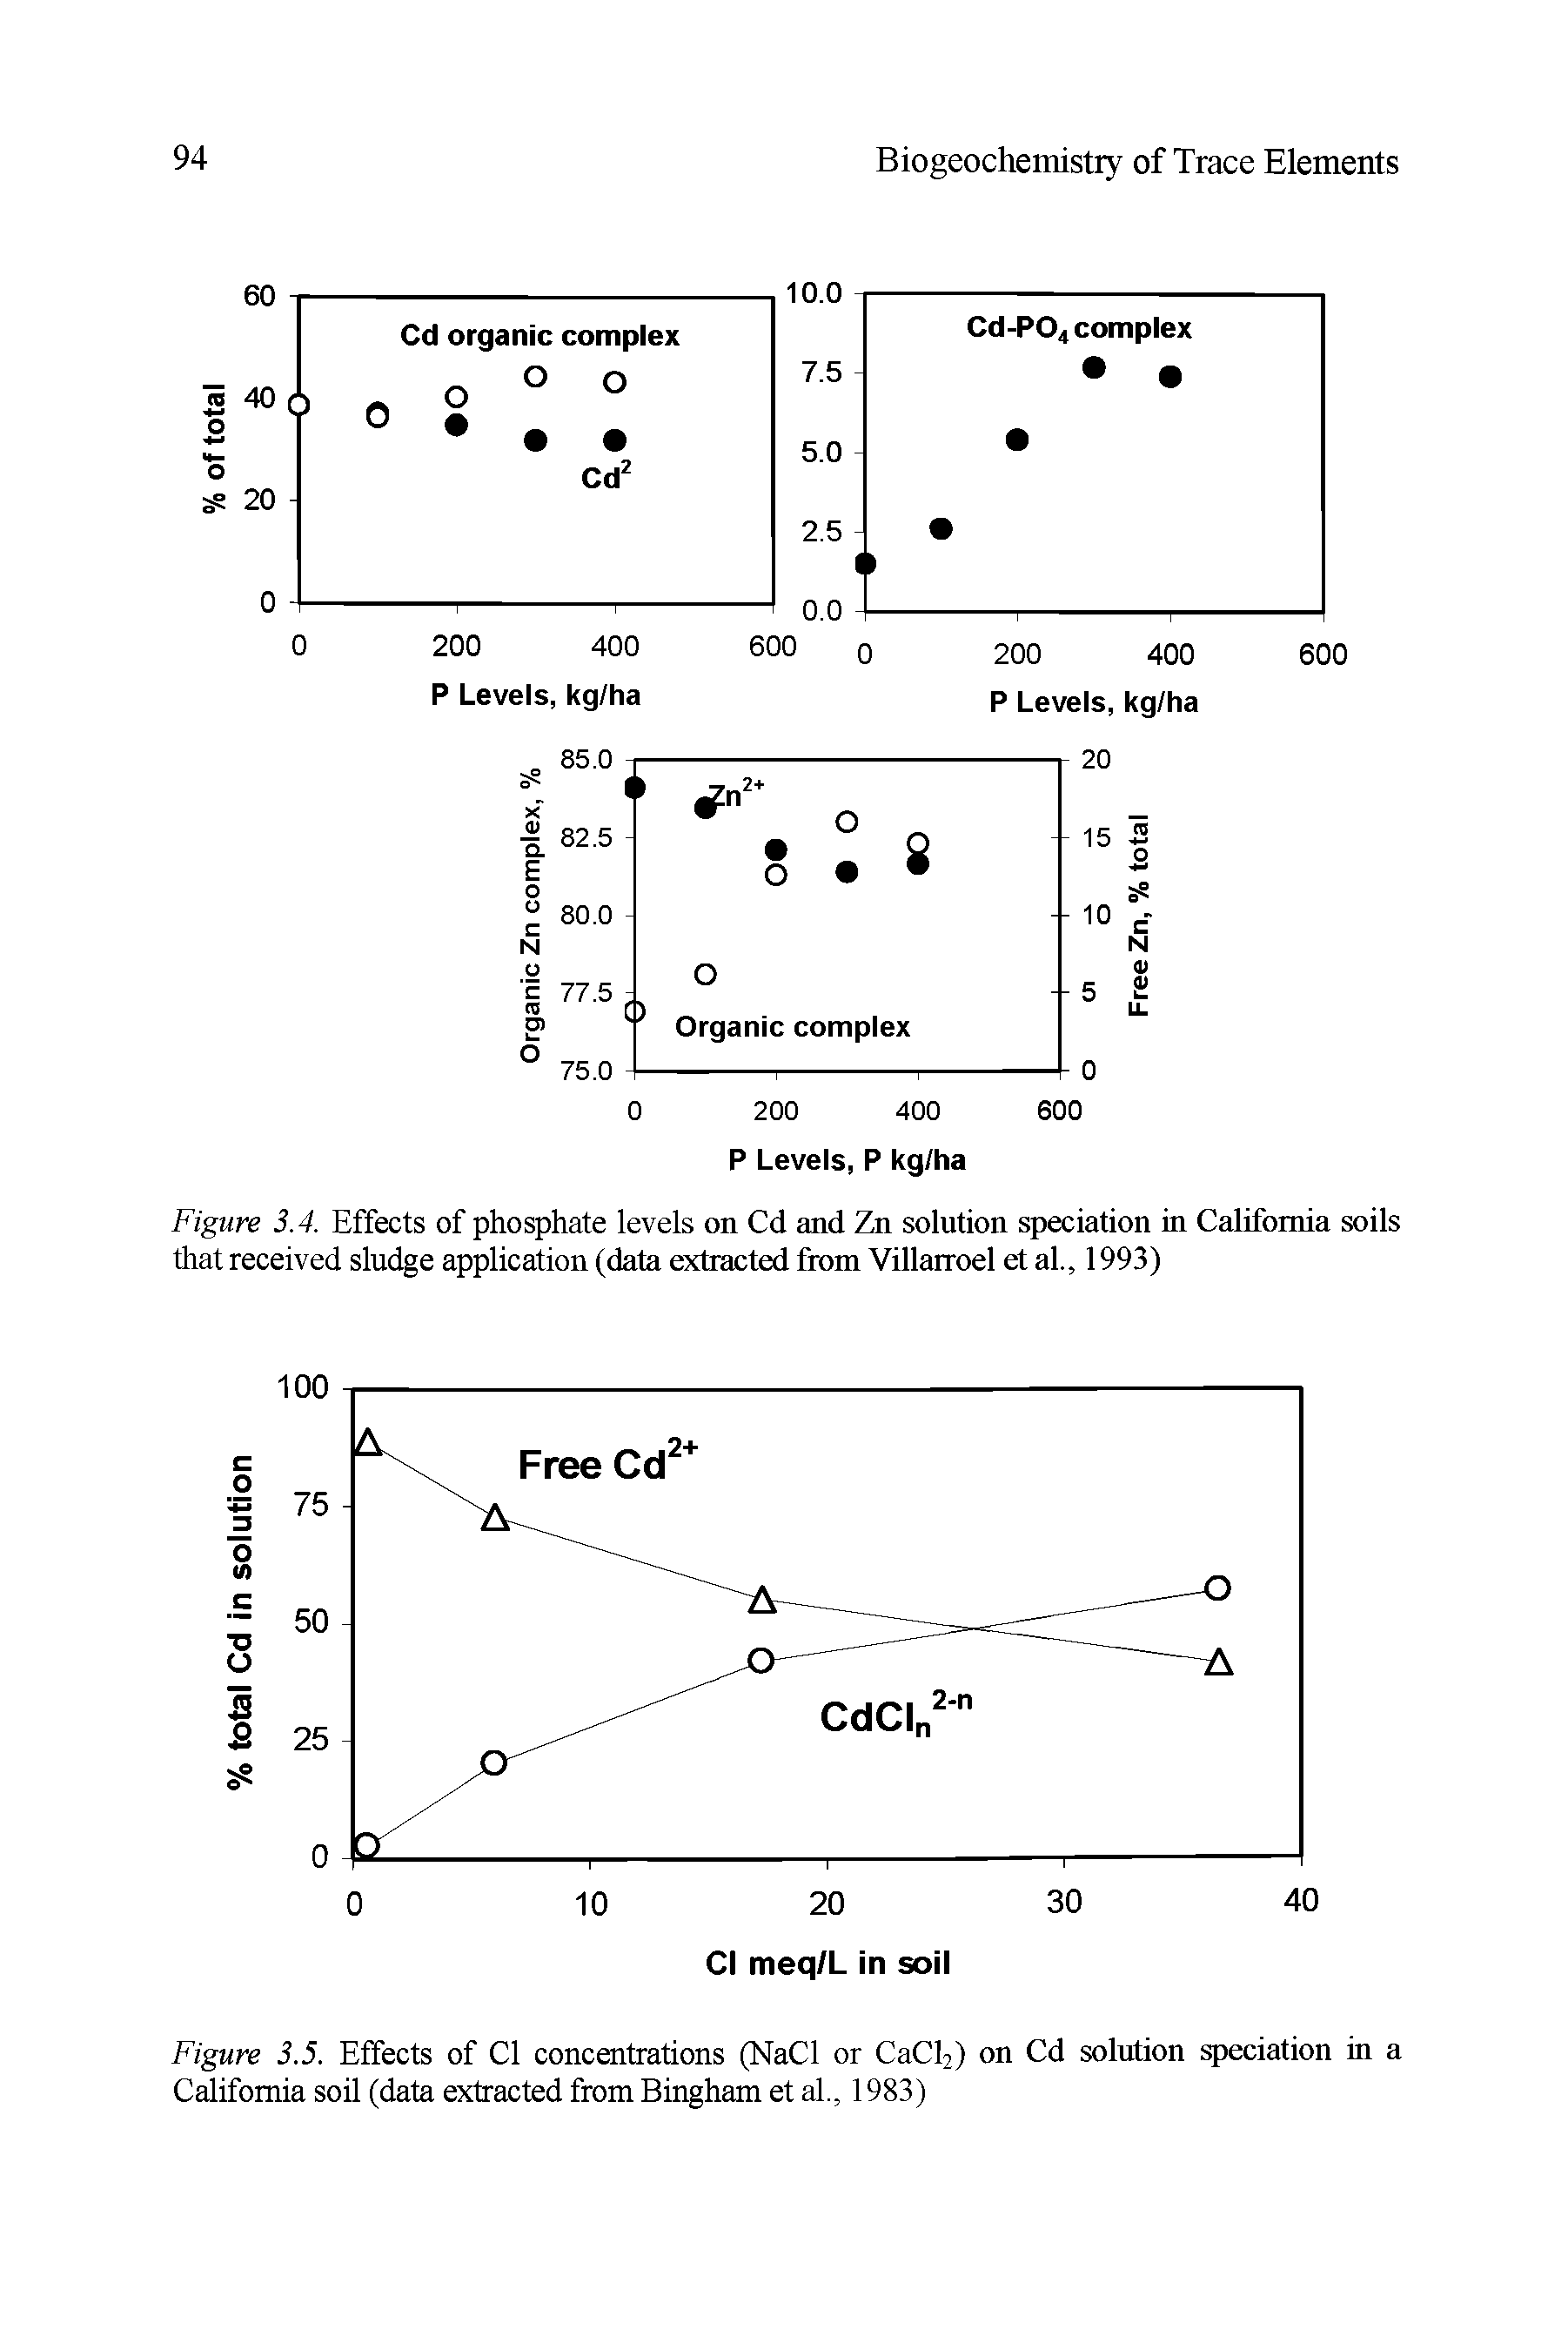 Figure 3.4. Effects of phosphate levels on Cd and Zn solution speciation in California soils that received sludge application (data extracted from Villarroel et al., 1993)...